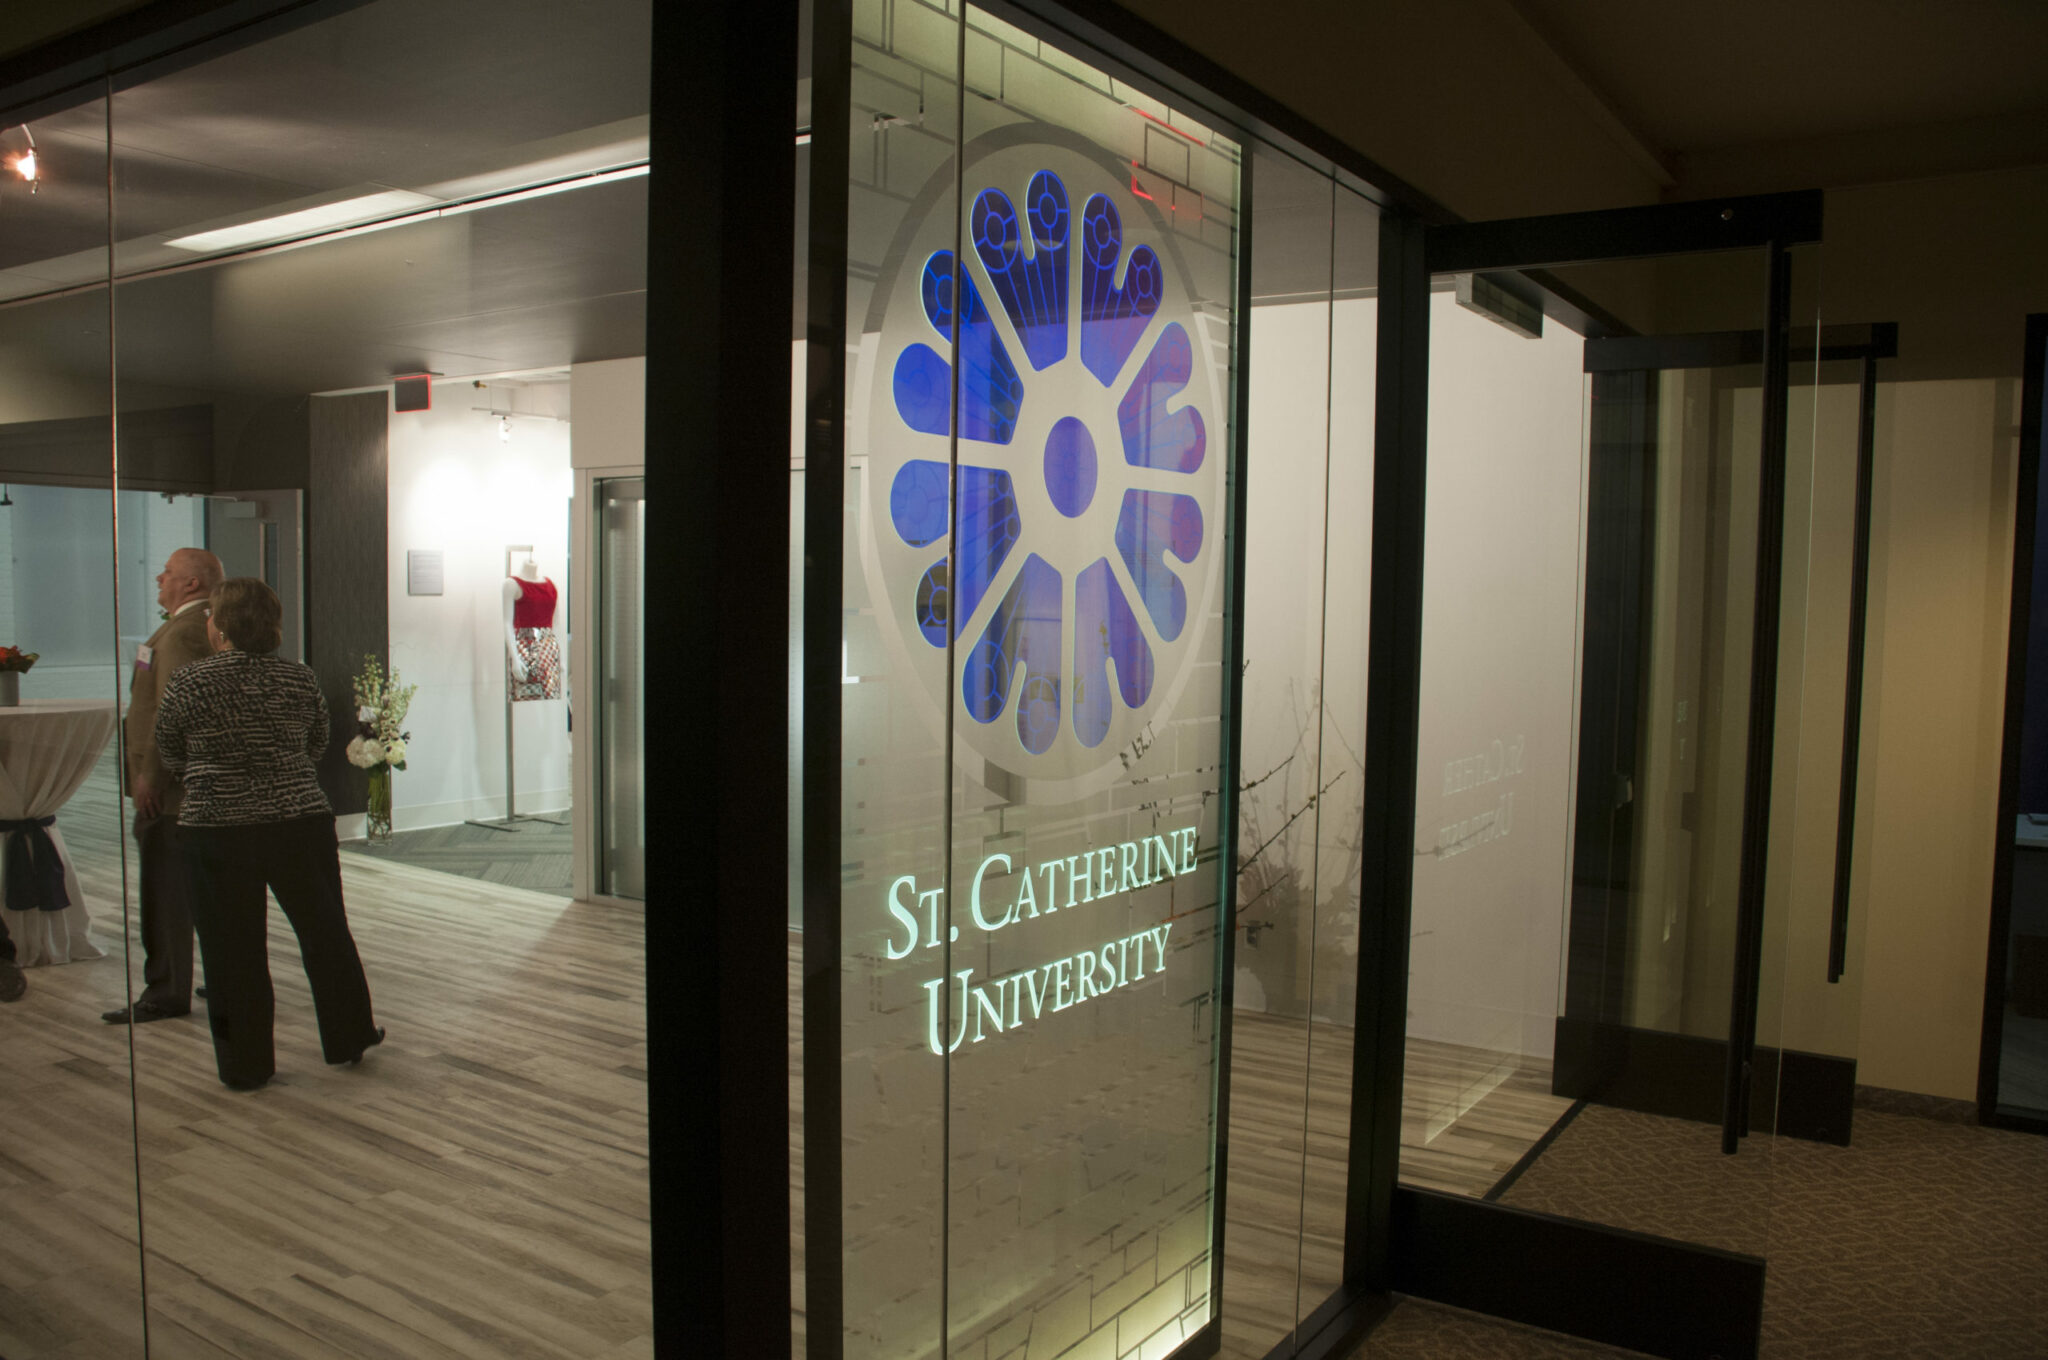 Interior door at St Catherine university with graphics manifested onto it